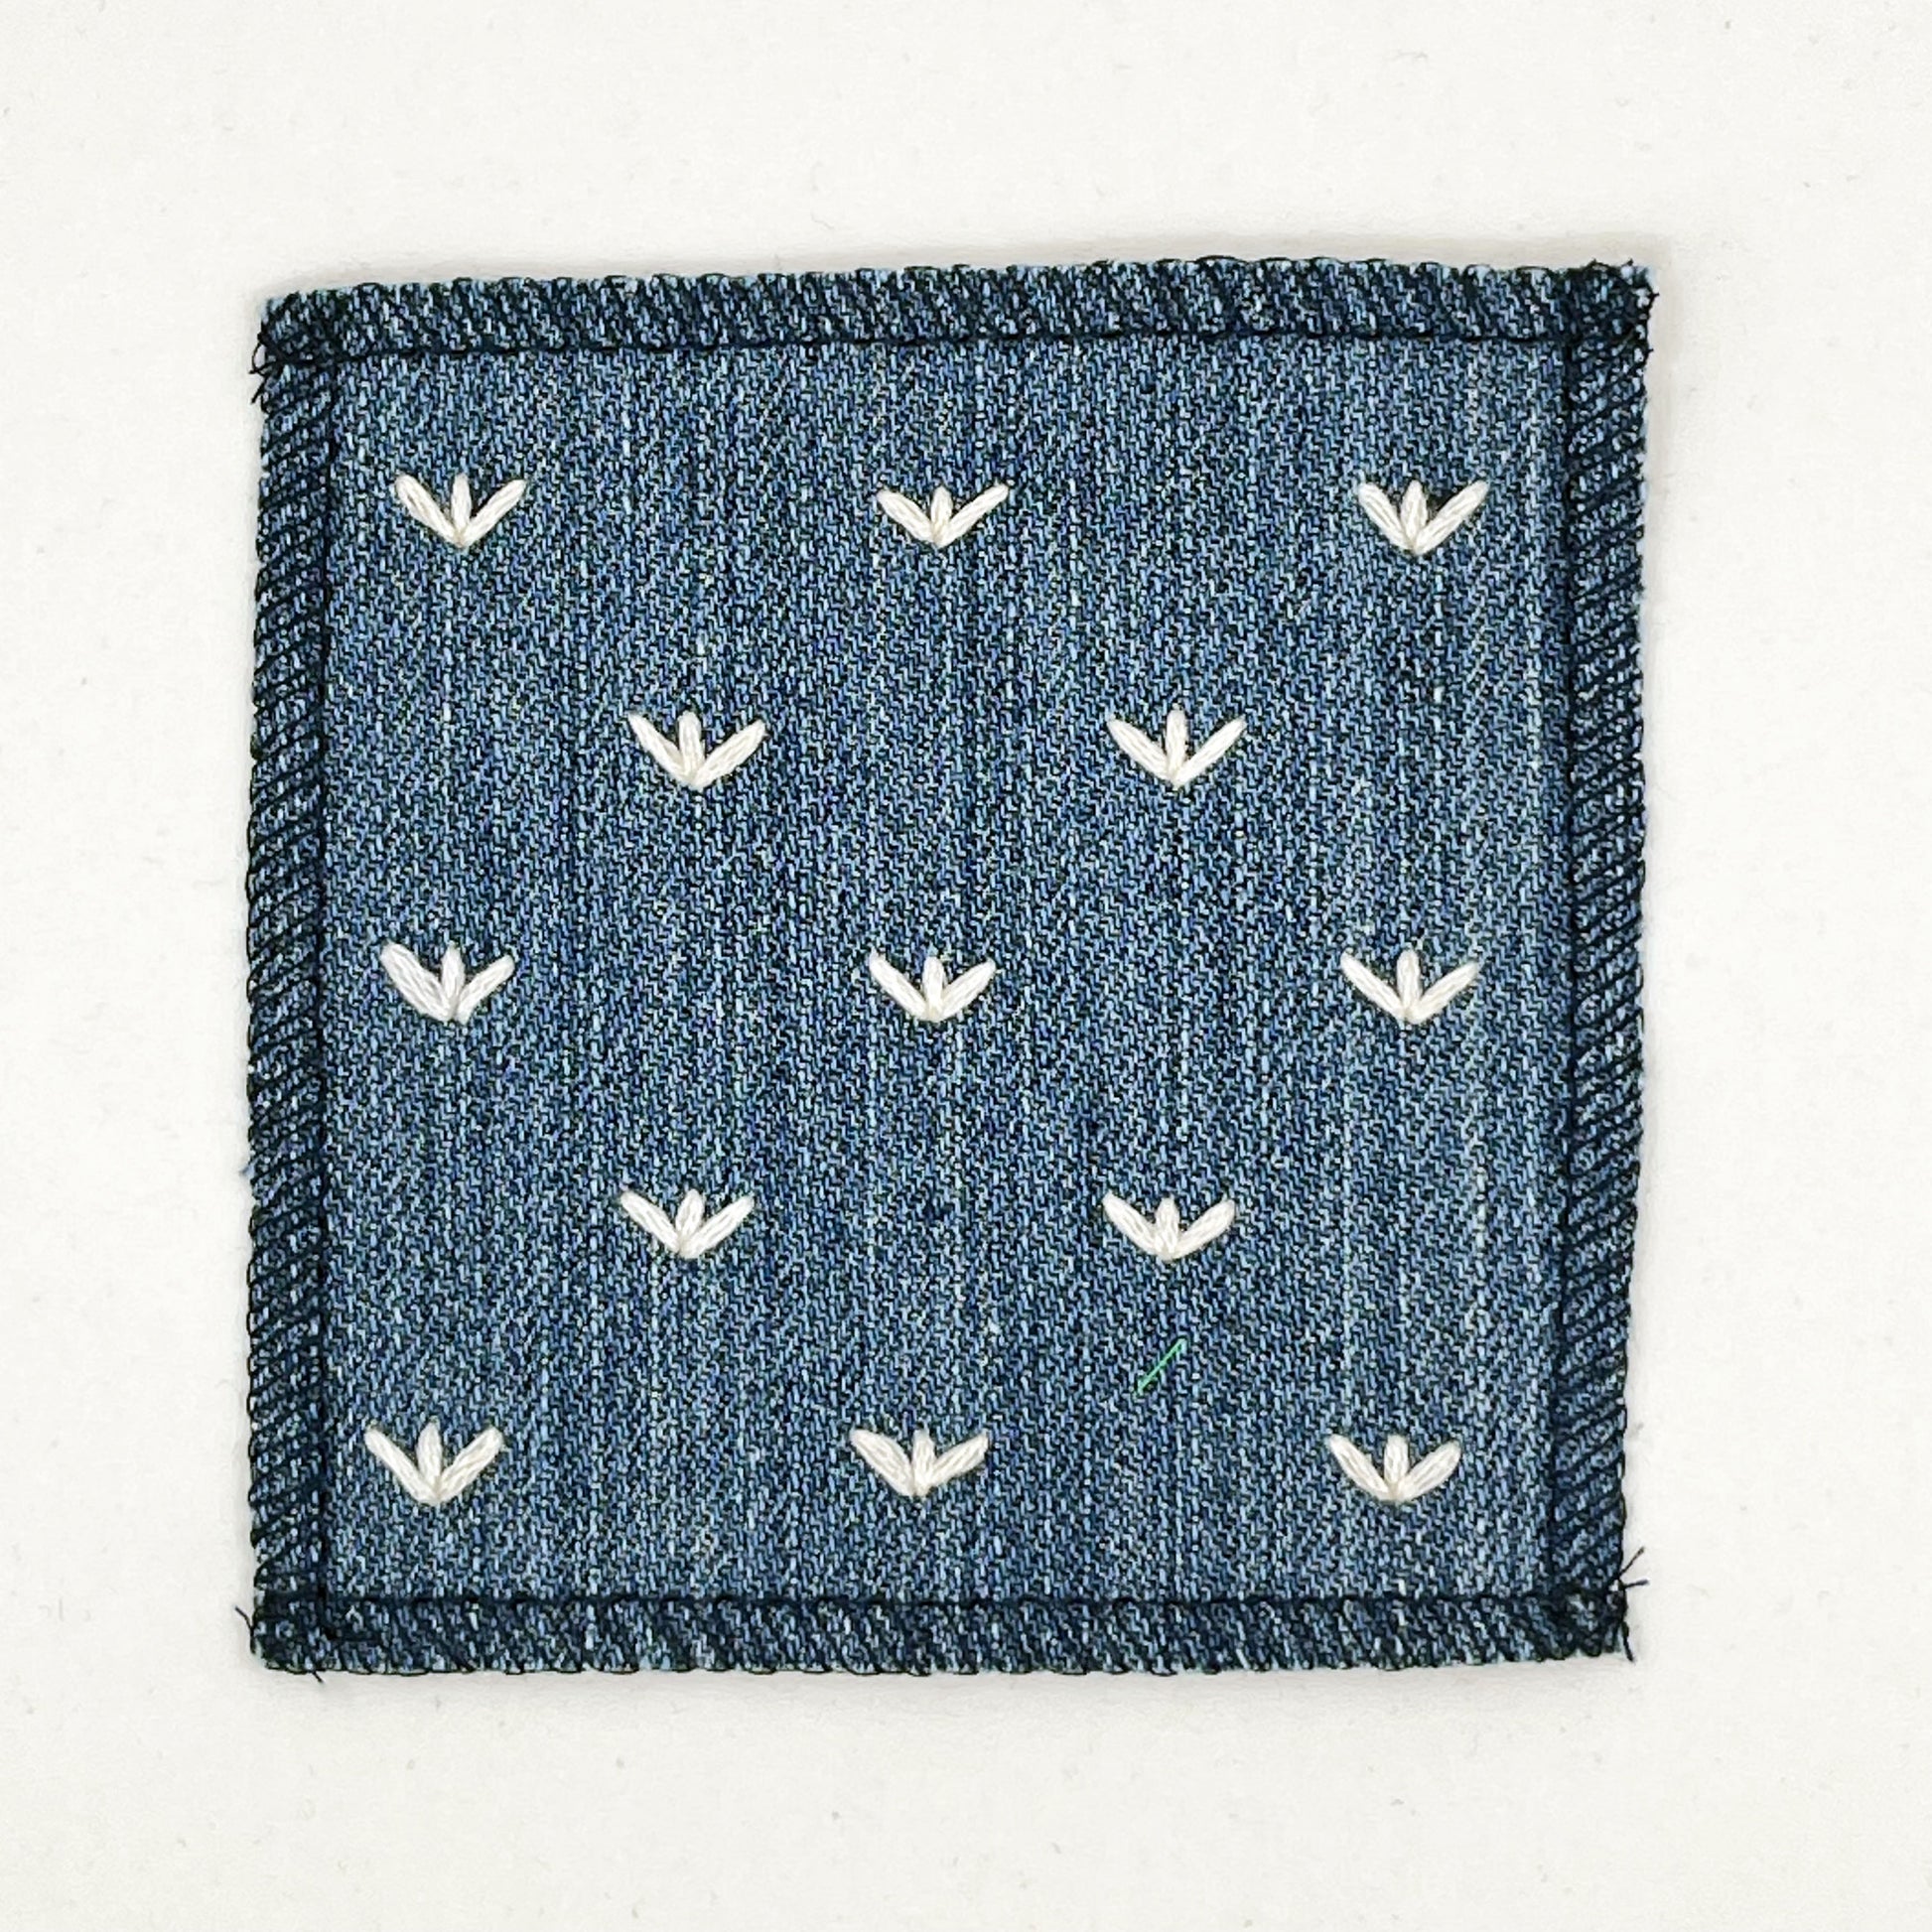 a square denim patch, with ivory stitches that look like birds feet or sprouts spread out in a diamond pattern, with overlocked edges, on a white background